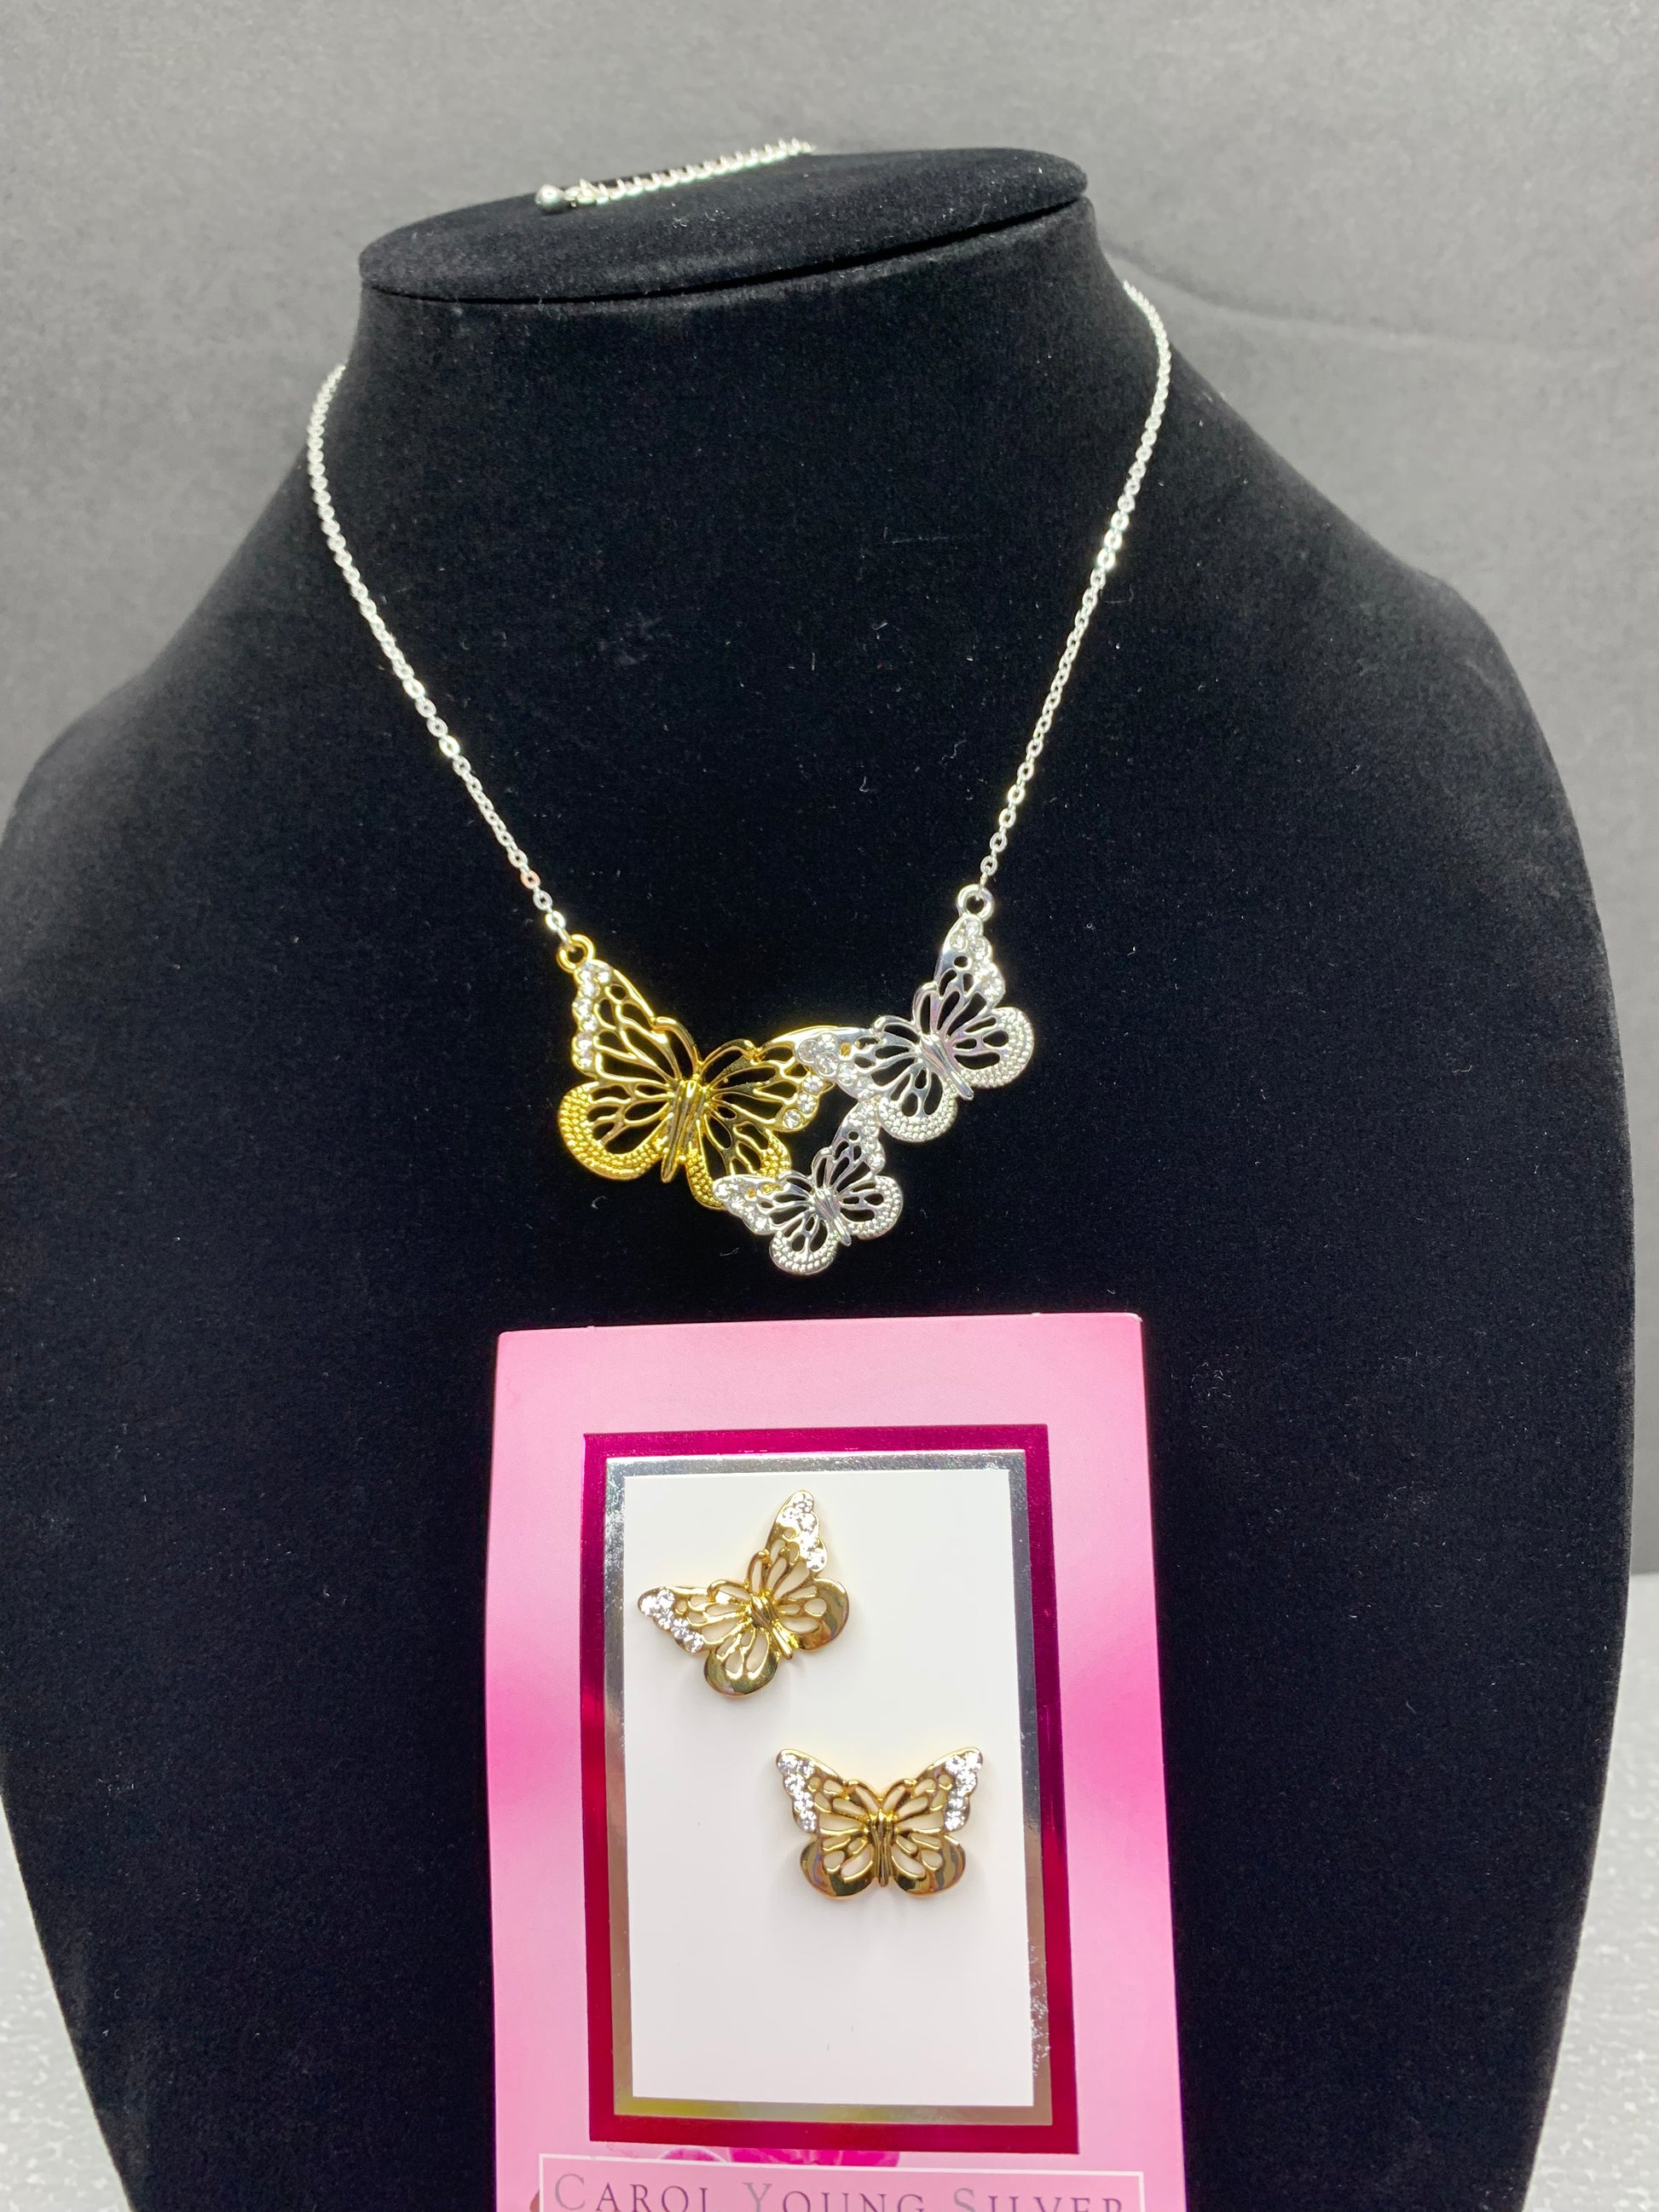 Lenni and Co® Butterfly Necklace – Tess+Tricia